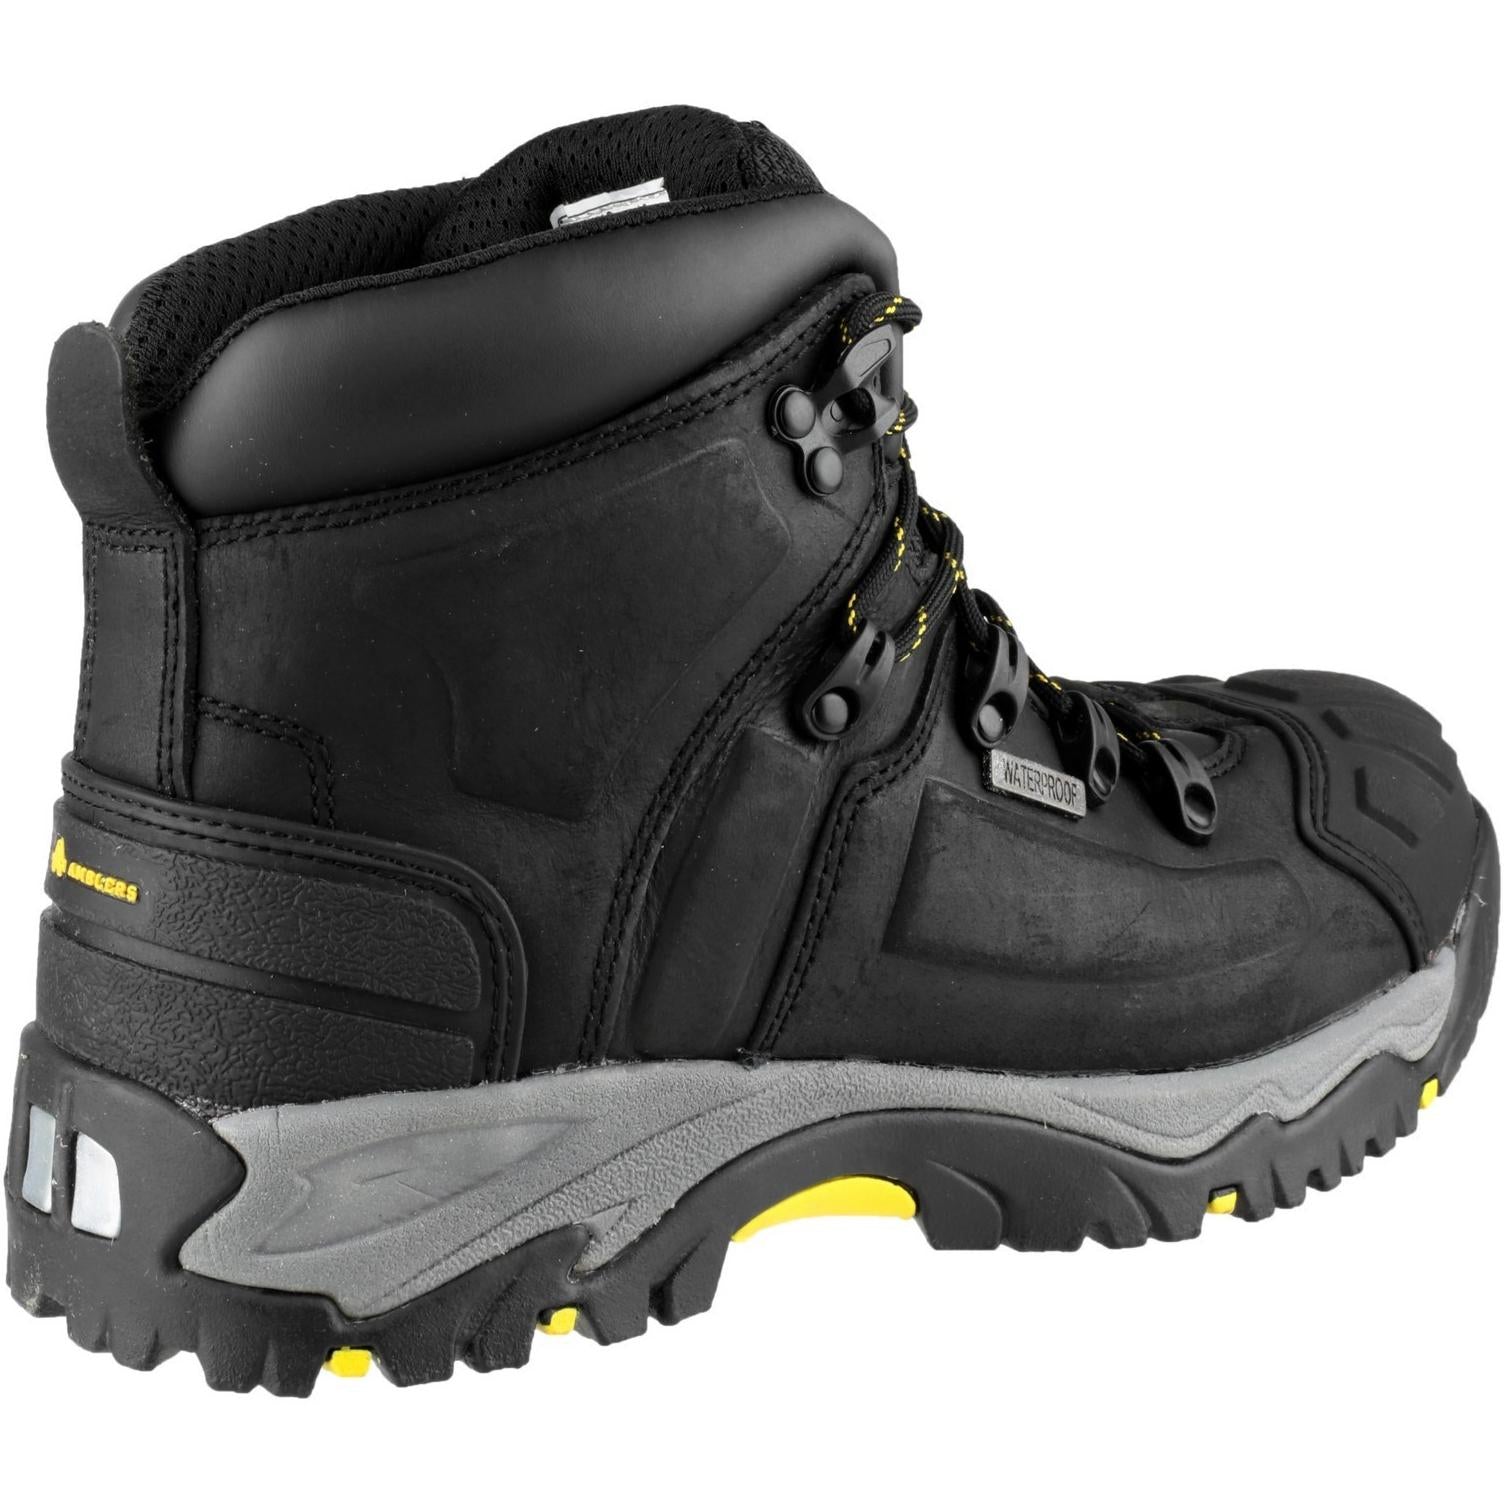 Amblers Safety AS803 Waterproof Wide Fit Safety Boot